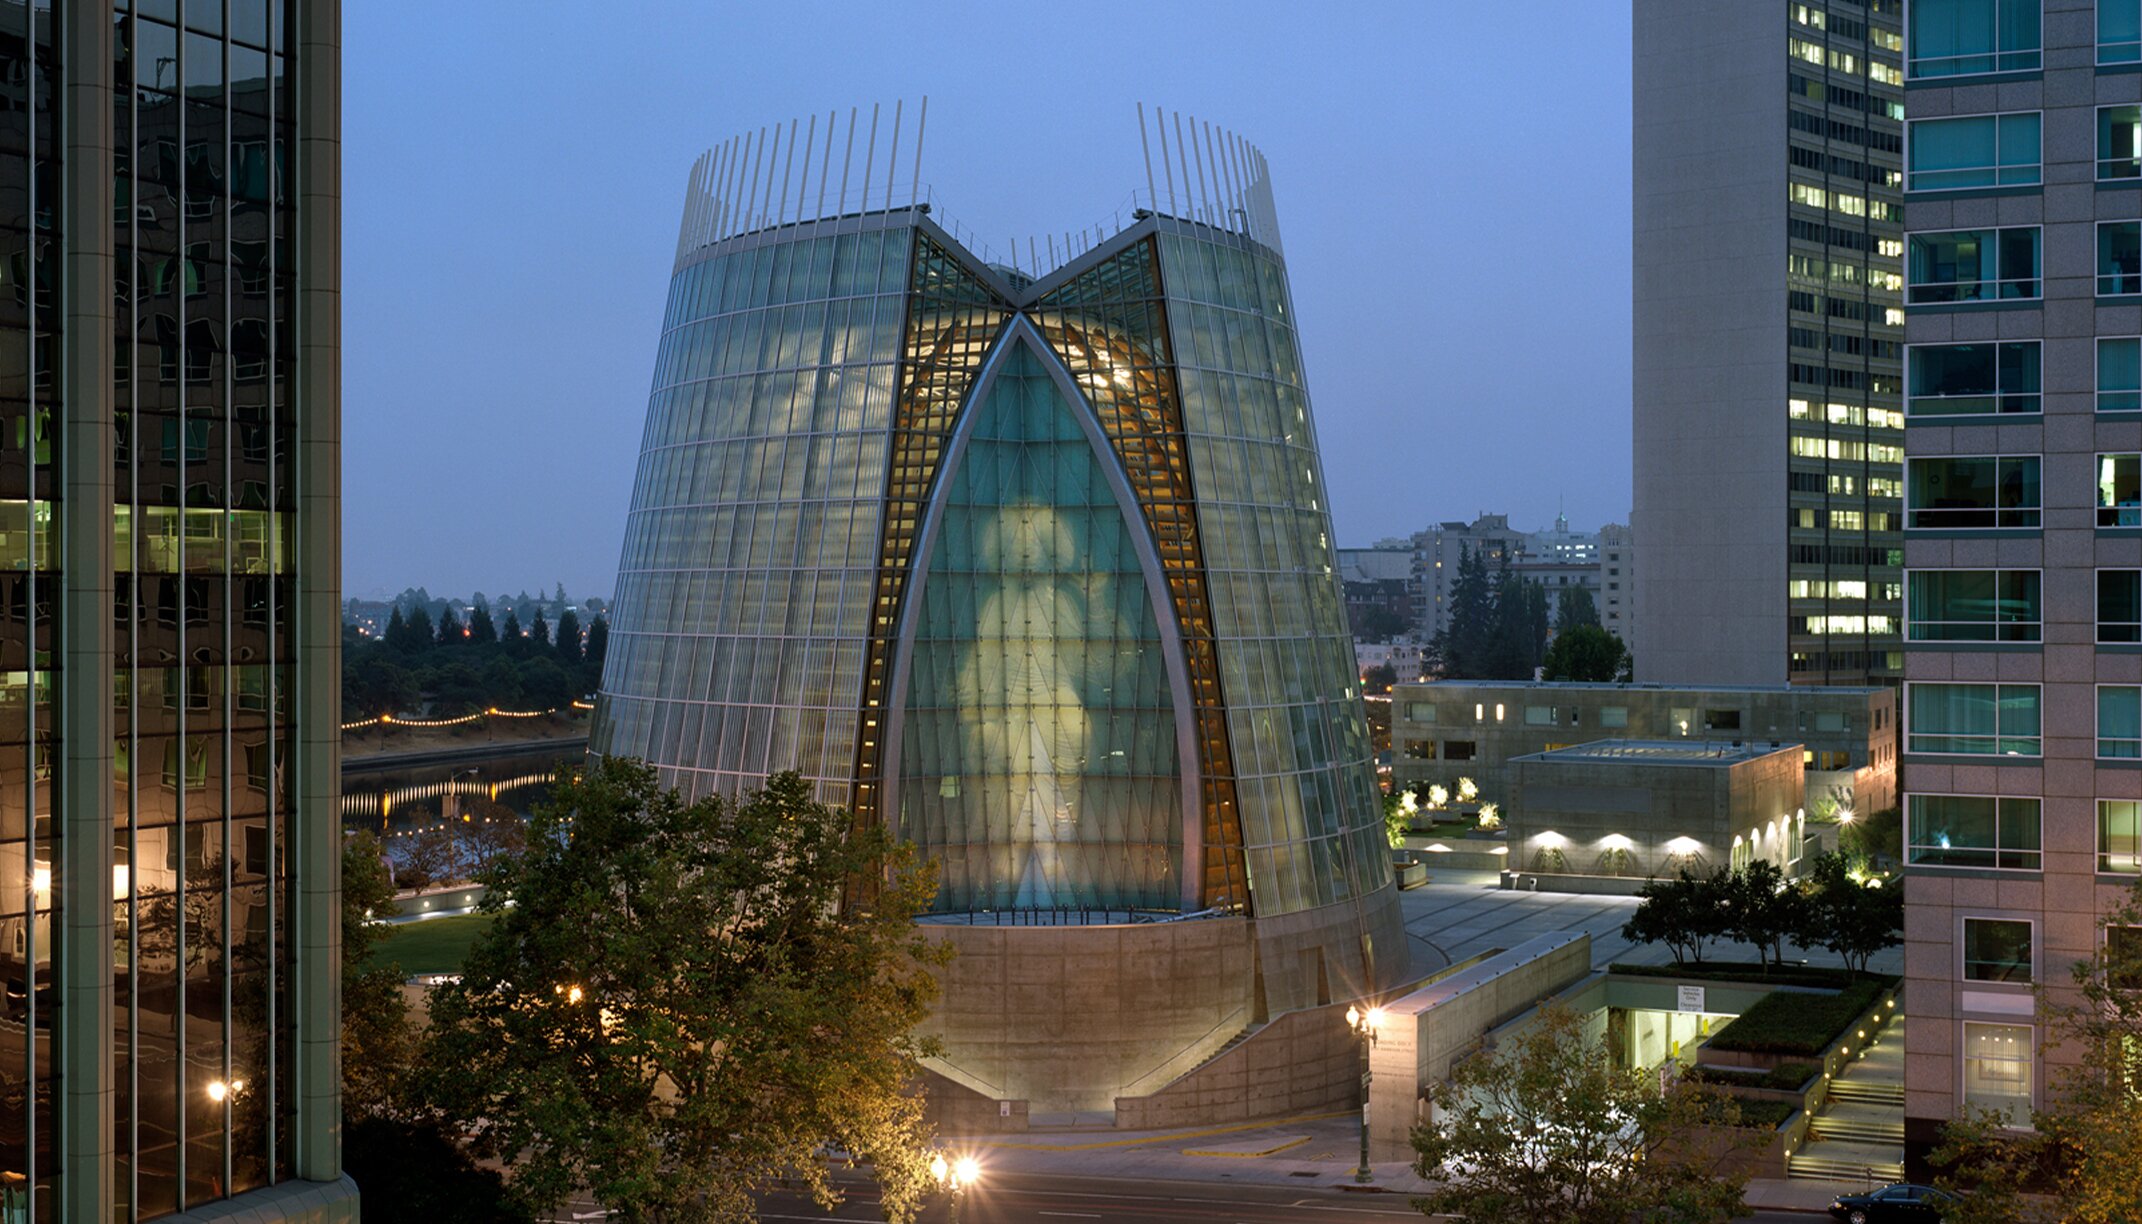 Detailview "Cathedral of Christ the Light"; illustrative aluminum panels